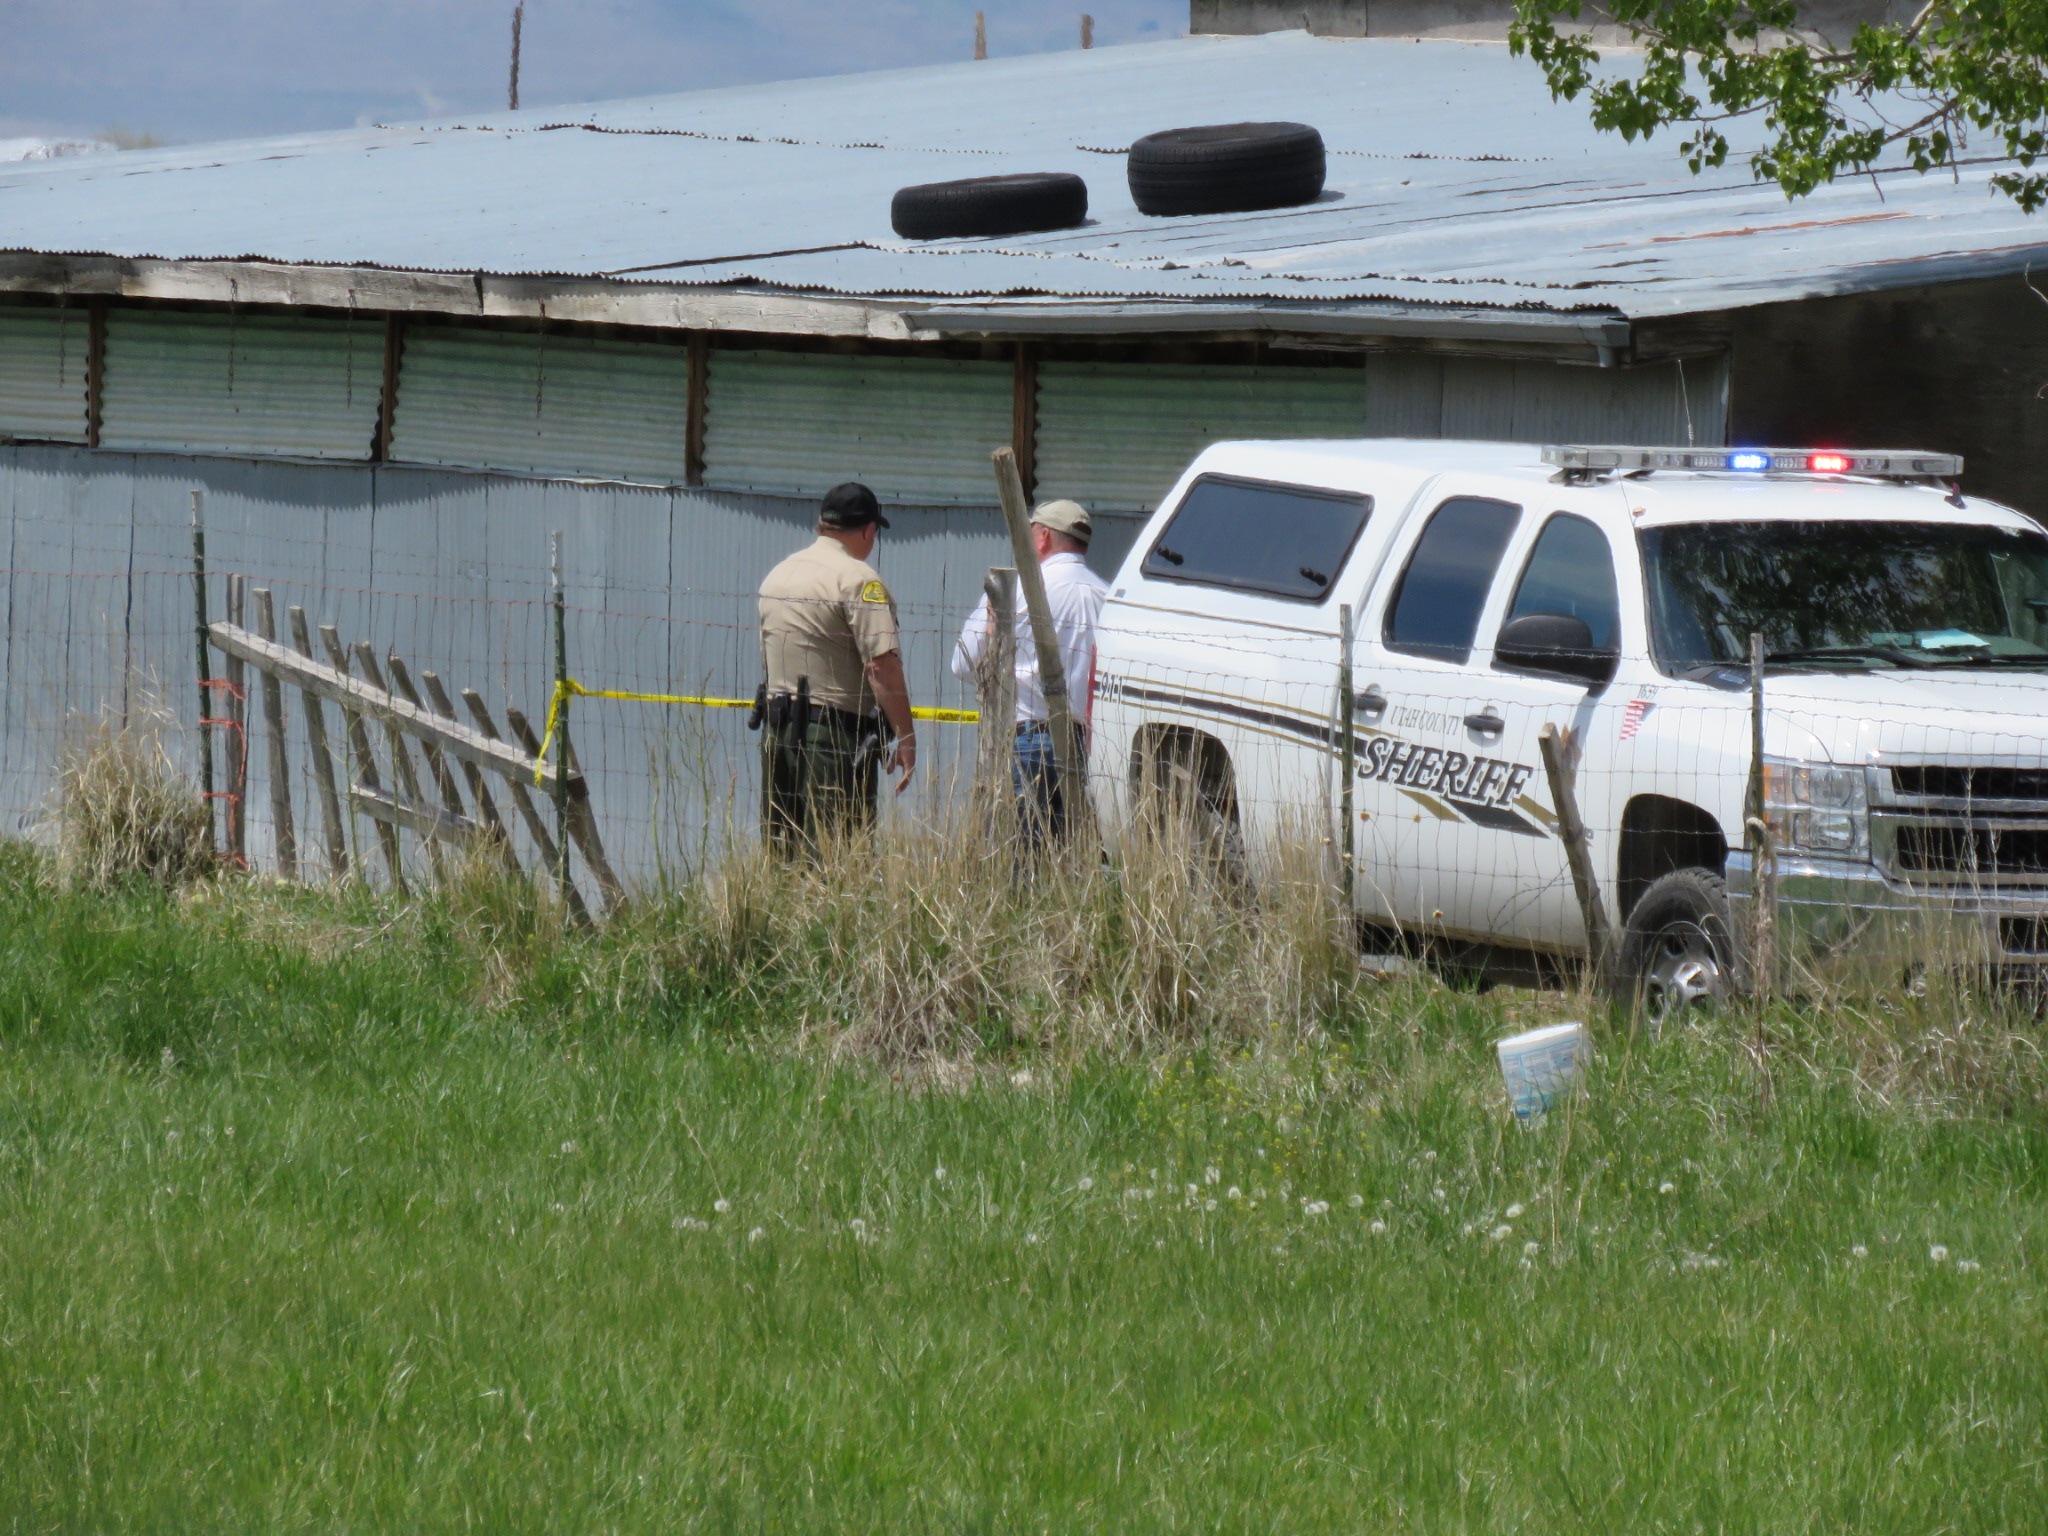 Authorities say Mark Daniel Bess was shot after threatening a Utah County Sheriff's deputy. Photo: Gephardt Daily